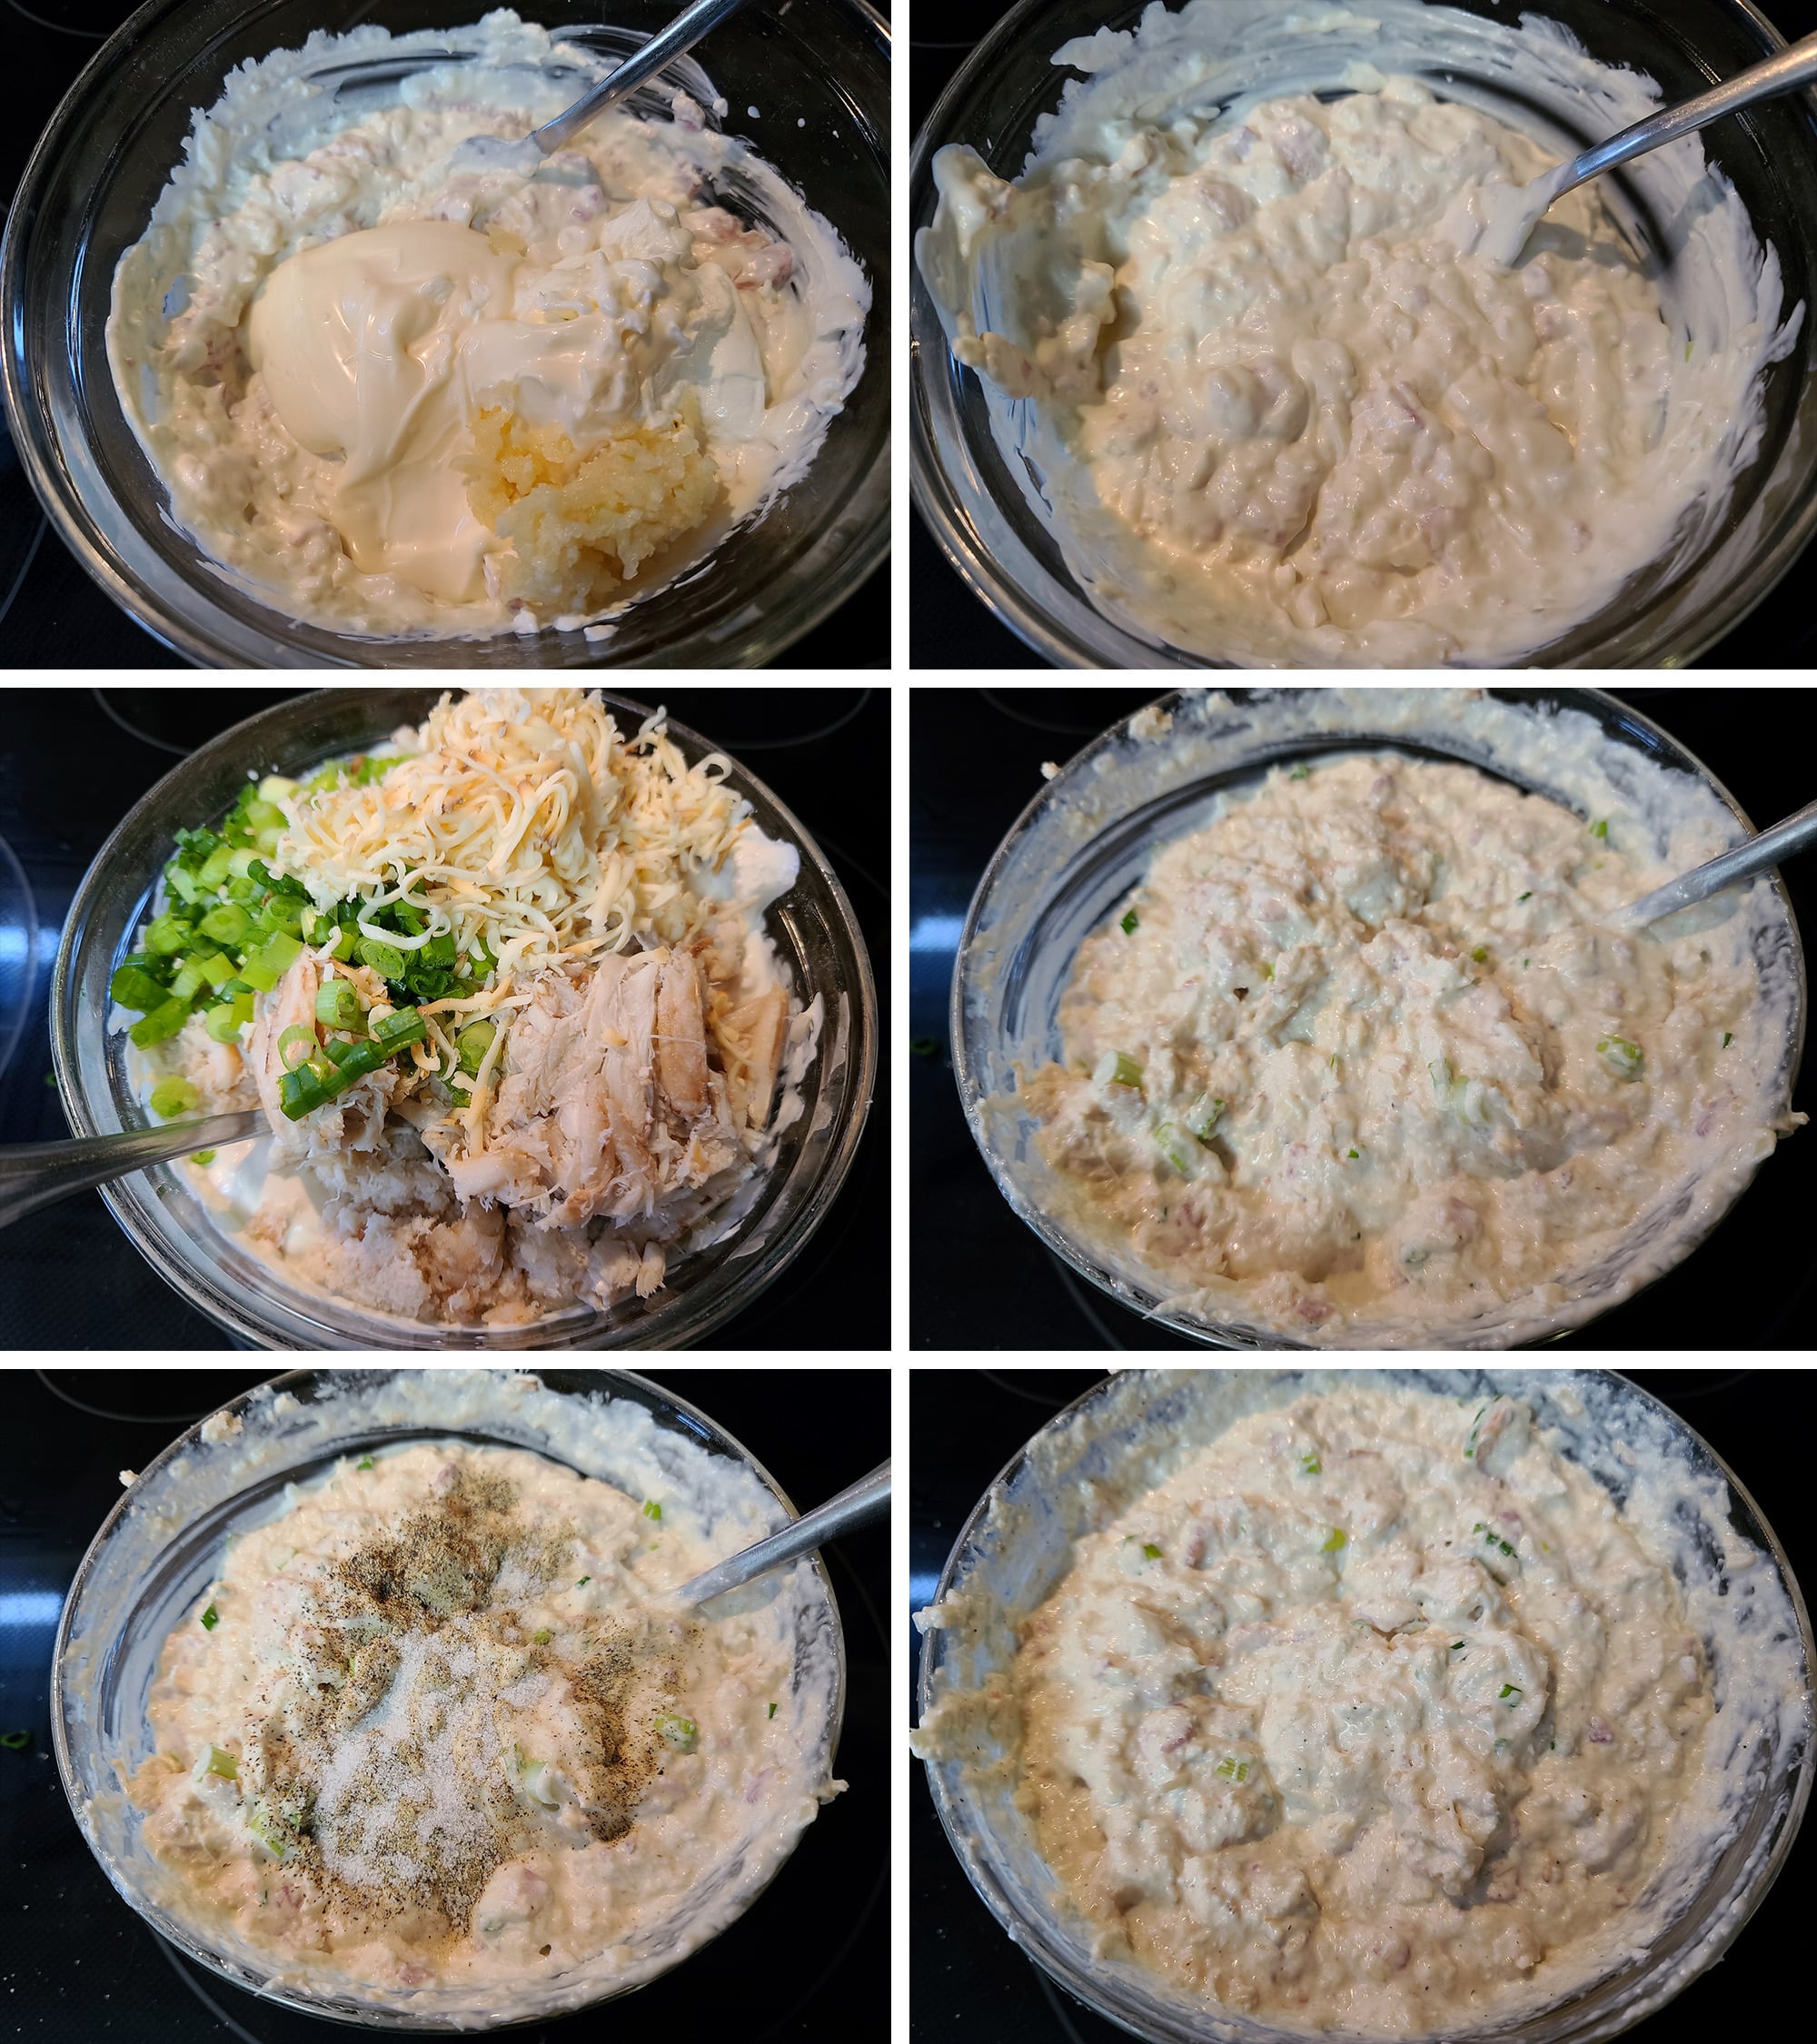 6 part image showing mayonnaise, sour cream, crab, green onions, garlic, and gouda being mixed with the bacon mixture in a bowl, then being seasoned with salt and pepper.